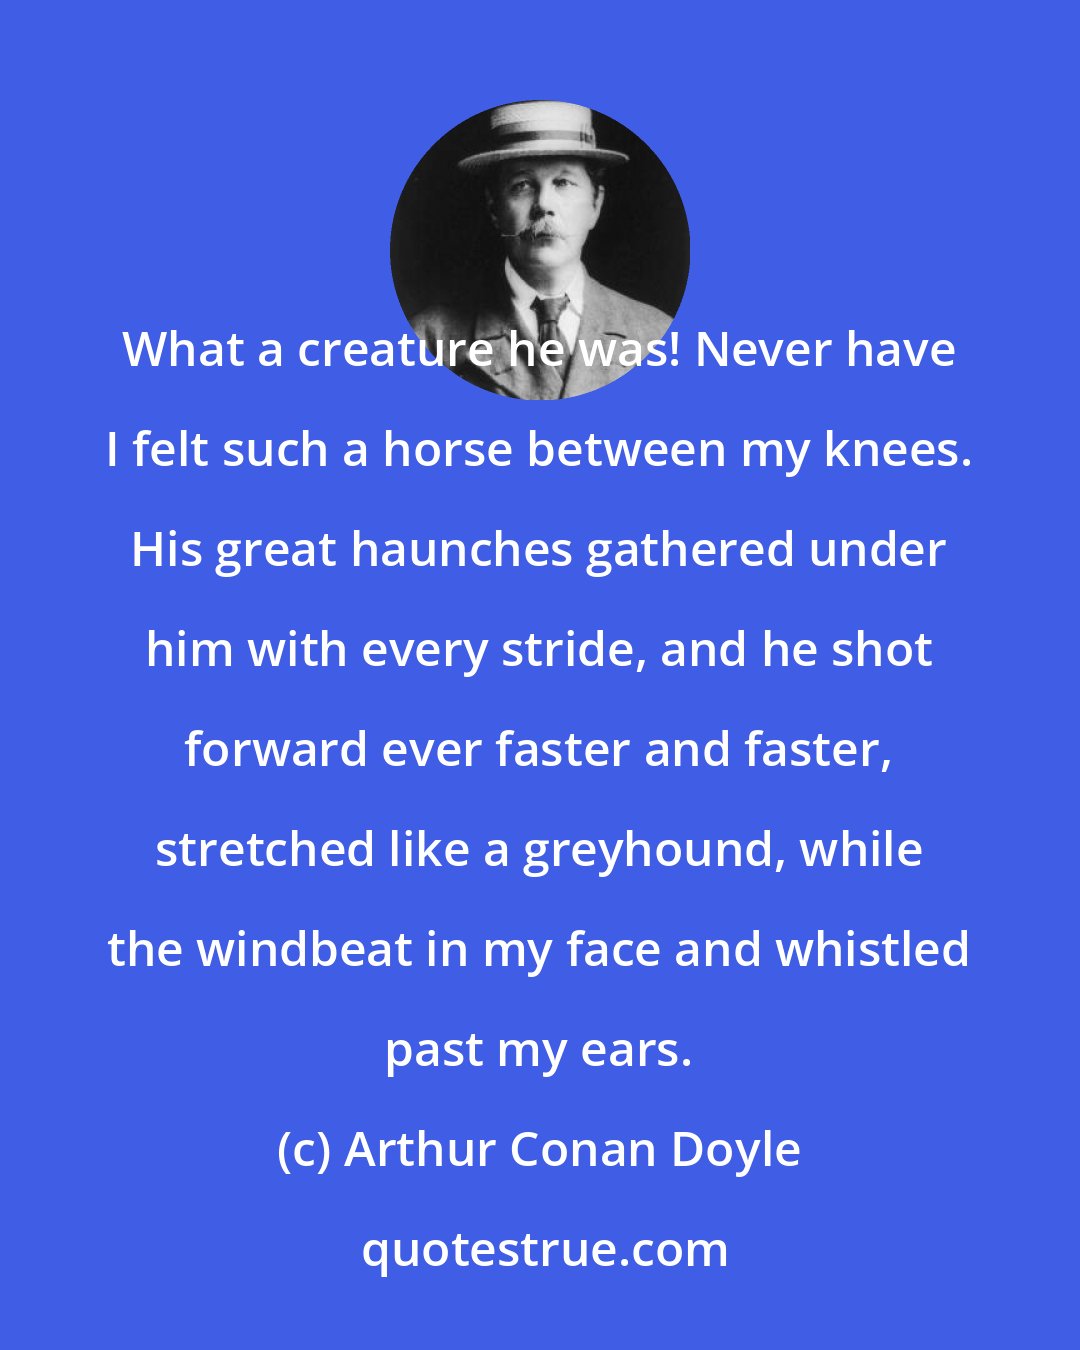 Arthur Conan Doyle: What a creature he was! Never have I felt such a horse between my knees. His great haunches gathered under him with every stride, and he shot forward ever faster and faster, stretched like a greyhound, while the windbeat in my face and whistled past my ears.